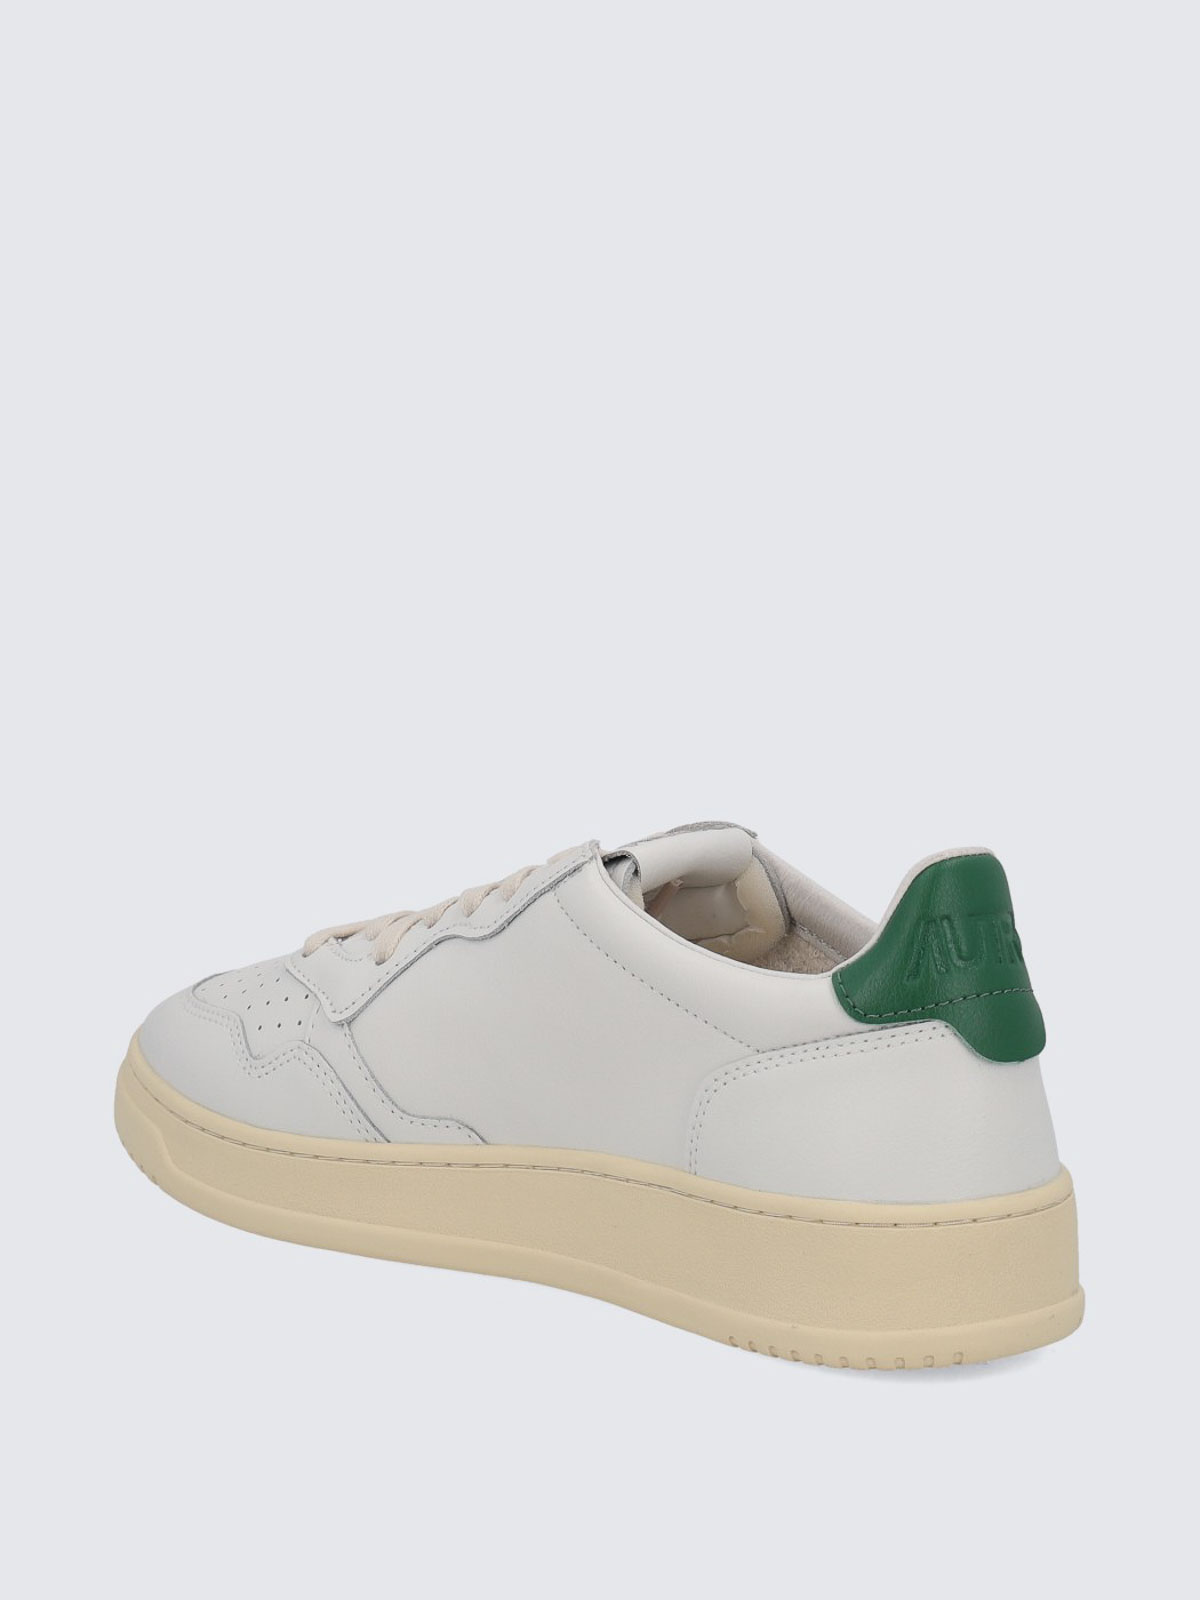 Shop Autry Medalist Low Top Sneakers In White